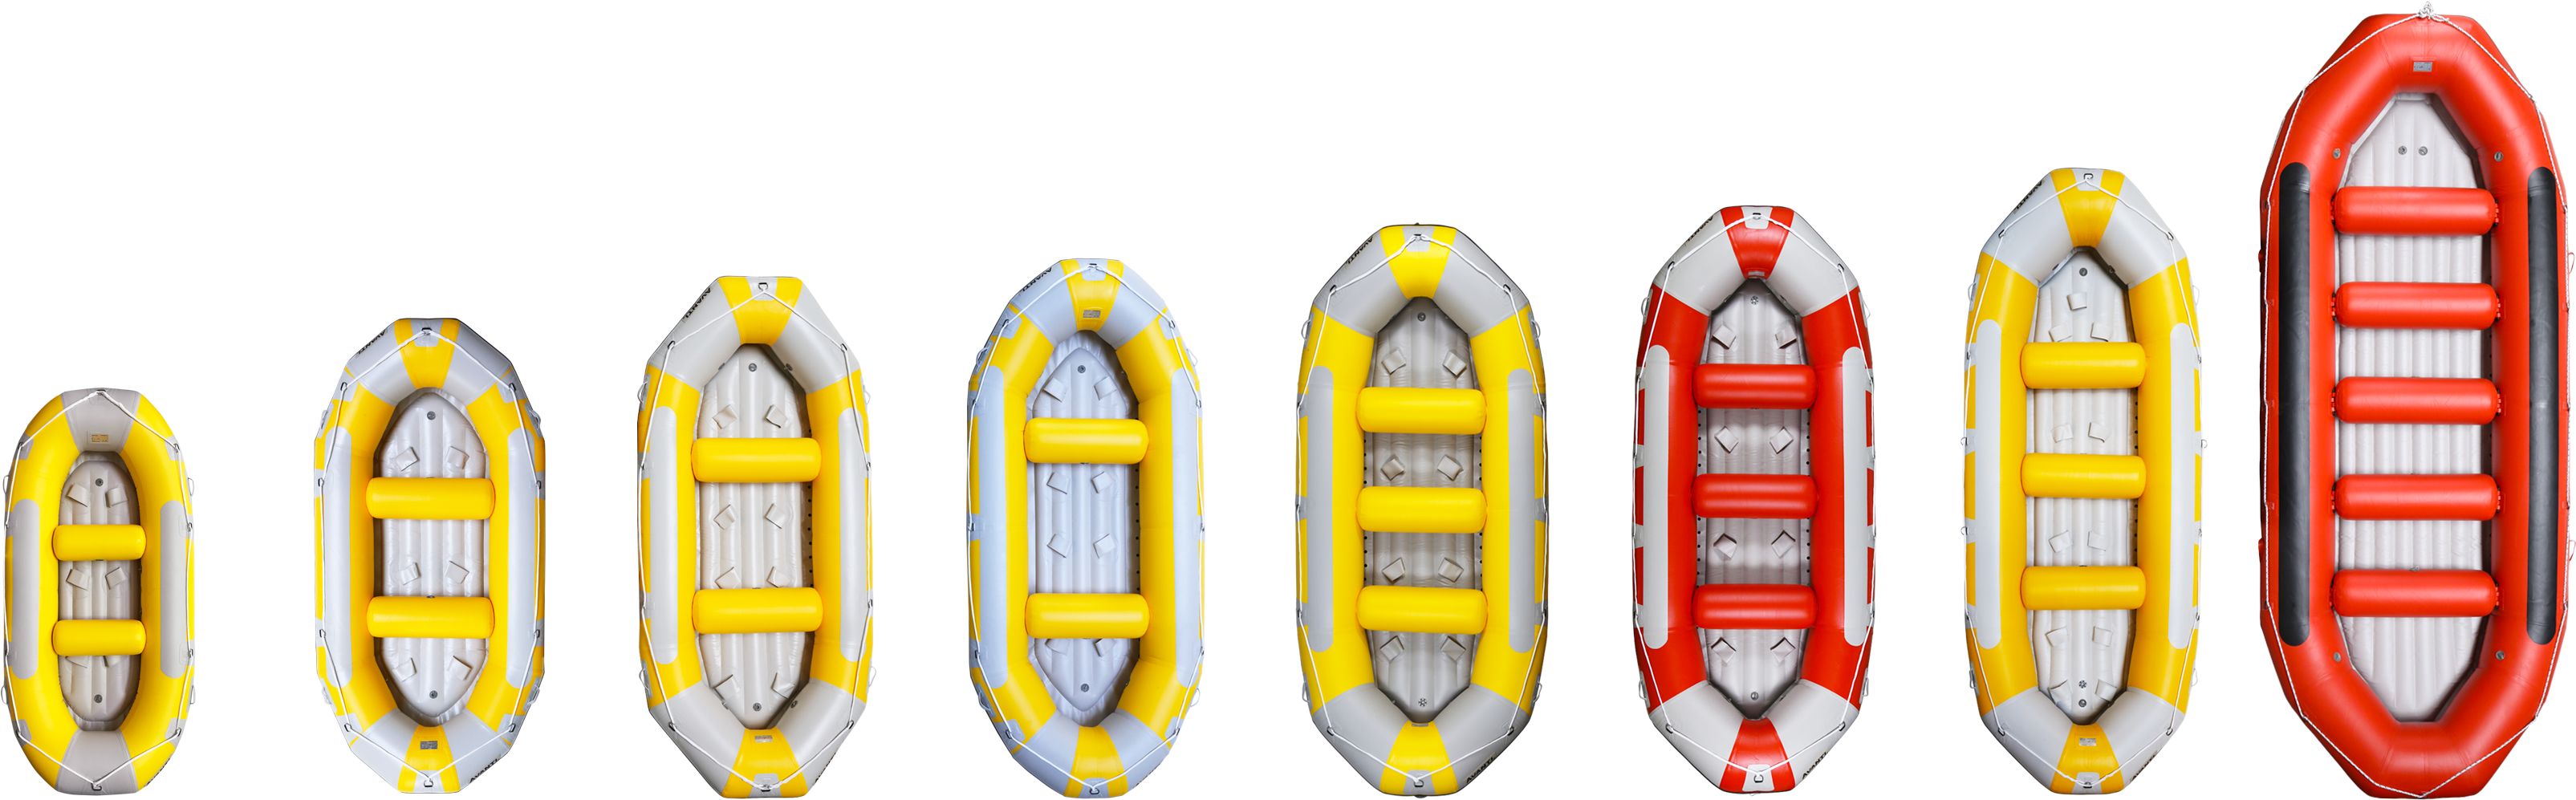 Inflatable Raft Selection PNG image